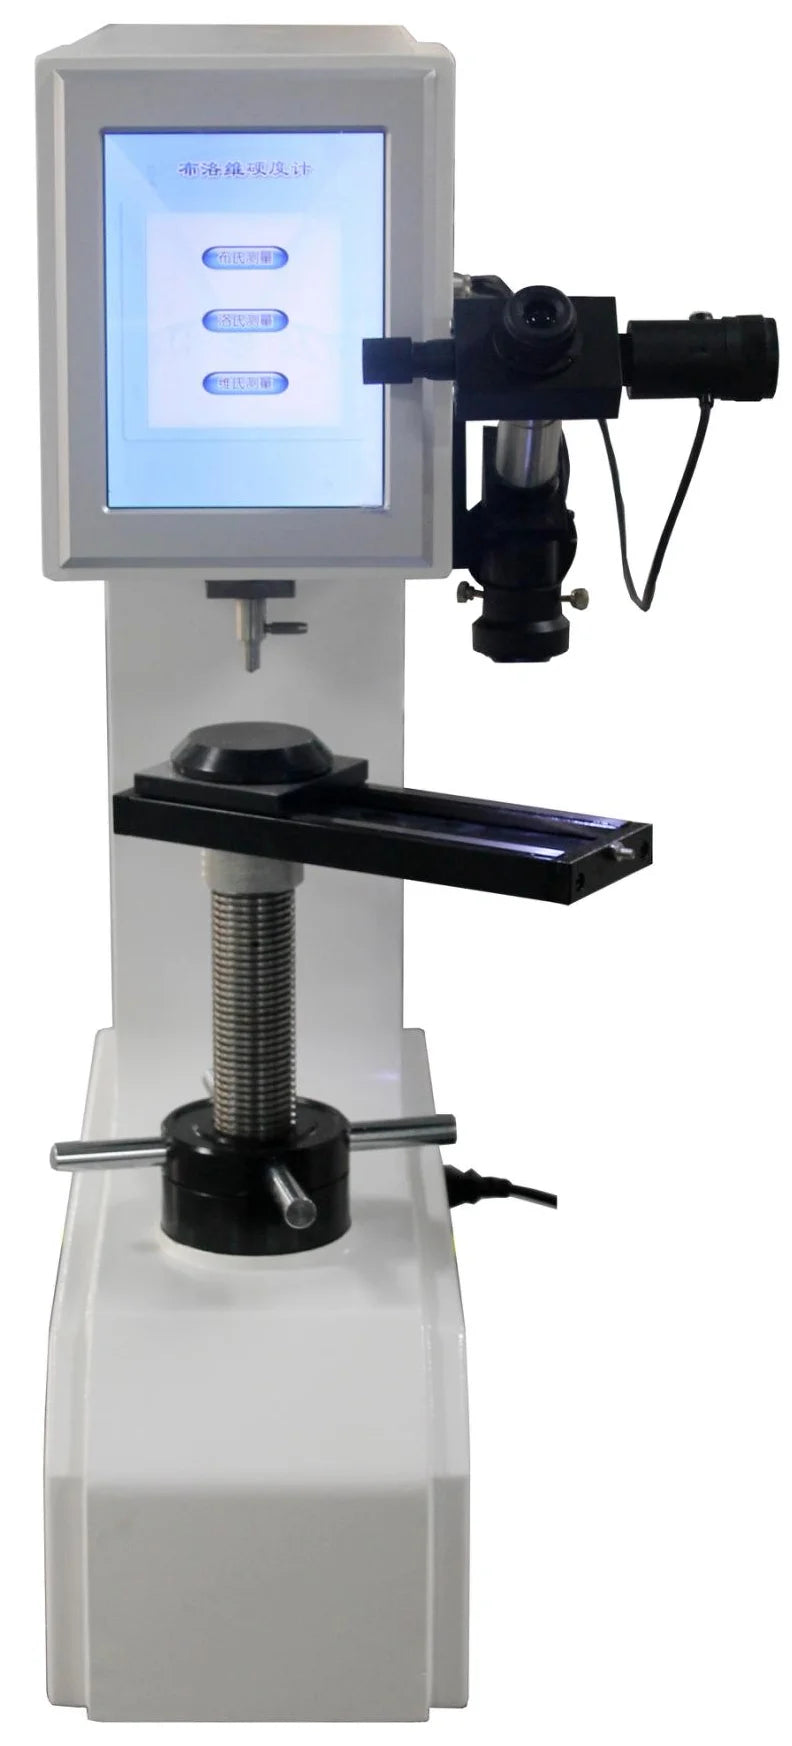 HBRV-187.5DX Senior Touch Screen Digital Brinell Rockwell Vickers Universal Hardness Tester